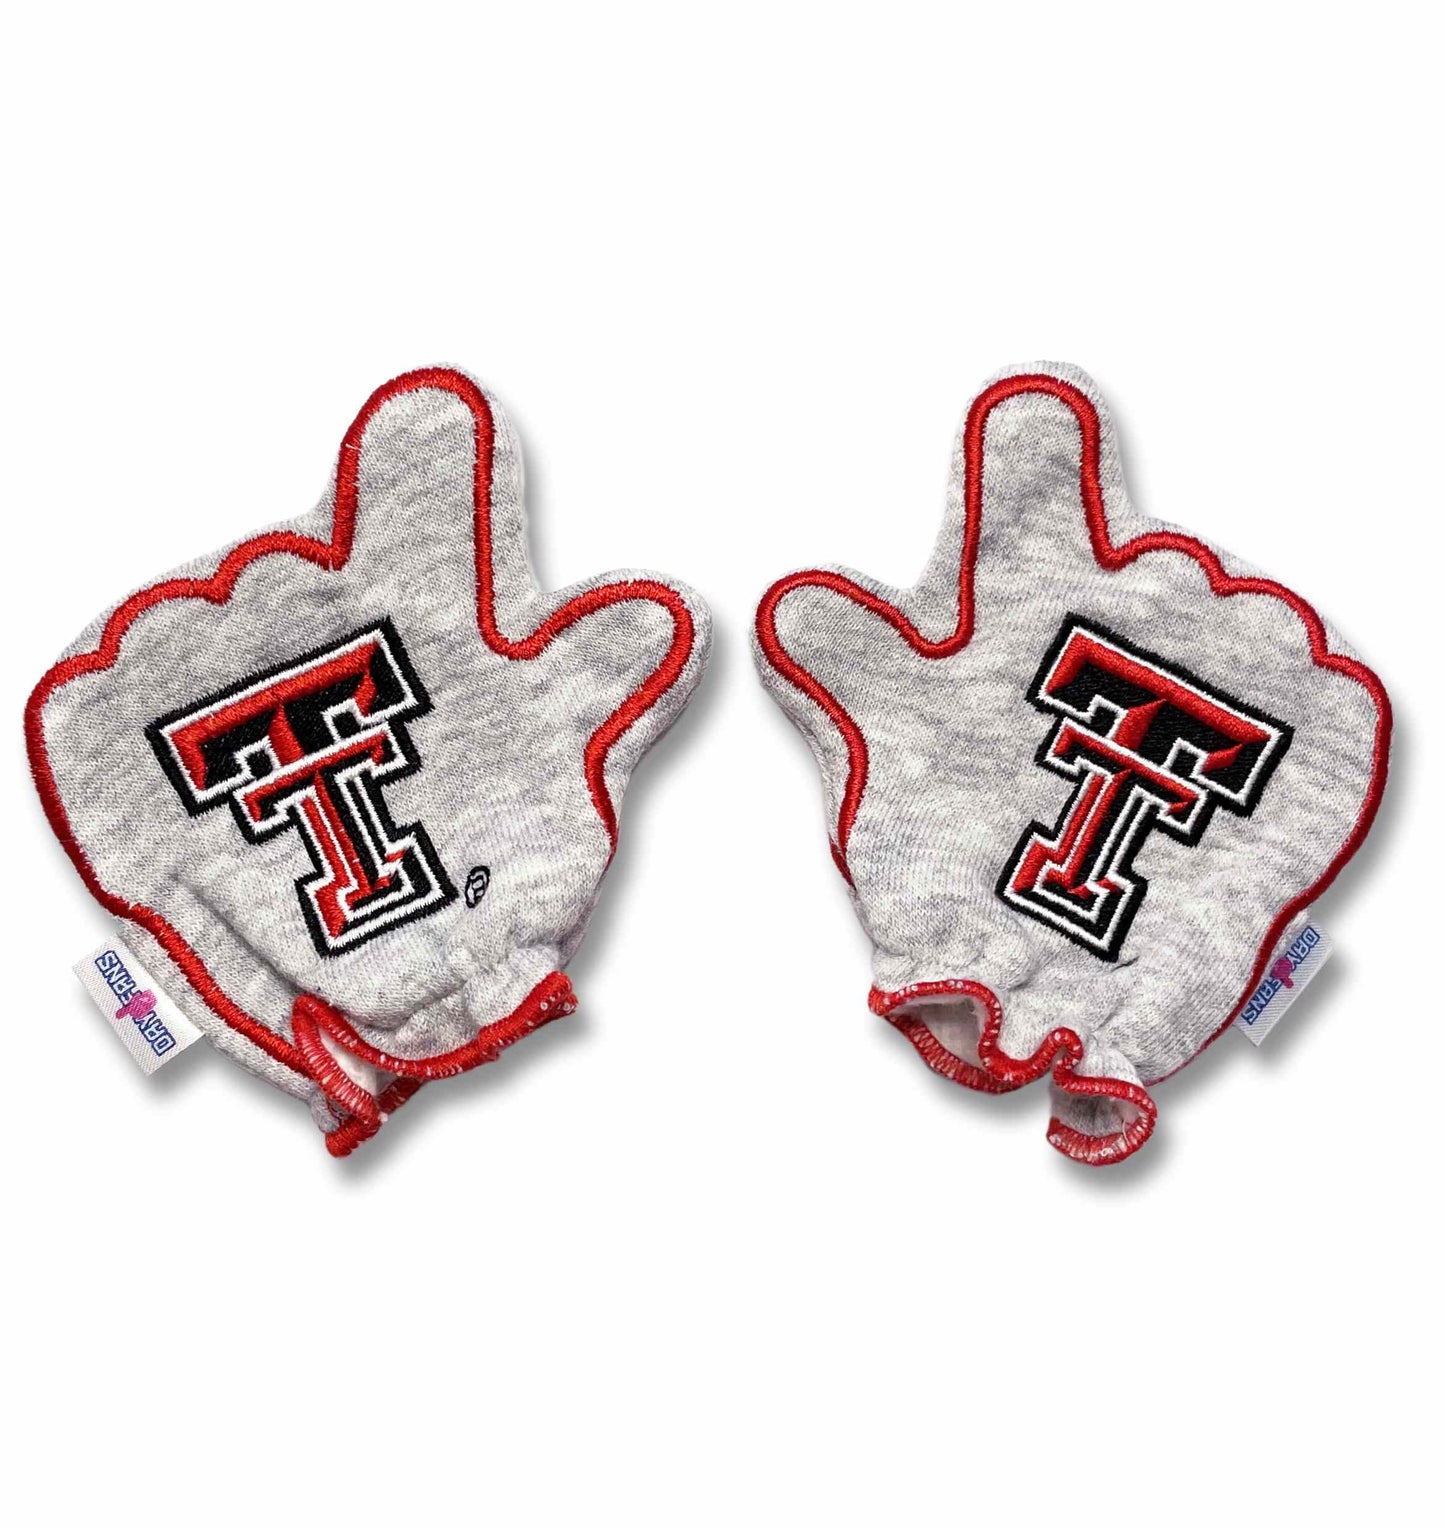 Texas Tech Wreck Em FanMitts Baby Mittens Heathered Gray Back Pair